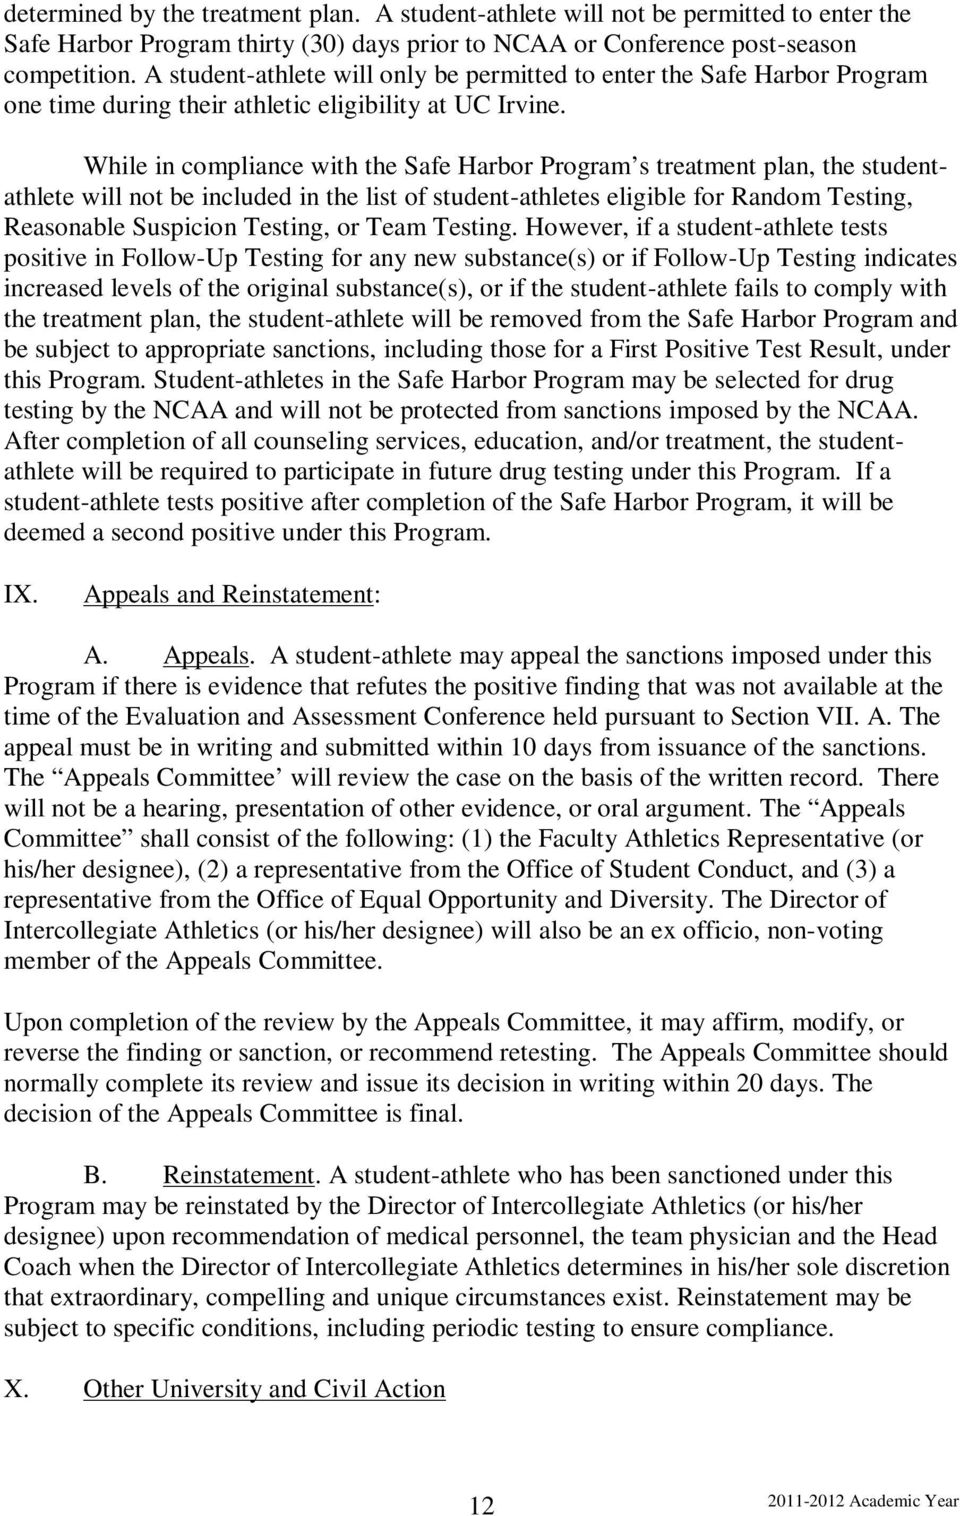 While in compliance with the Safe Harbor Program s treatment plan, the studentathlete will not be included in the list of student-athletes eligible for Random Testing, Reasonable Suspicion Testing,